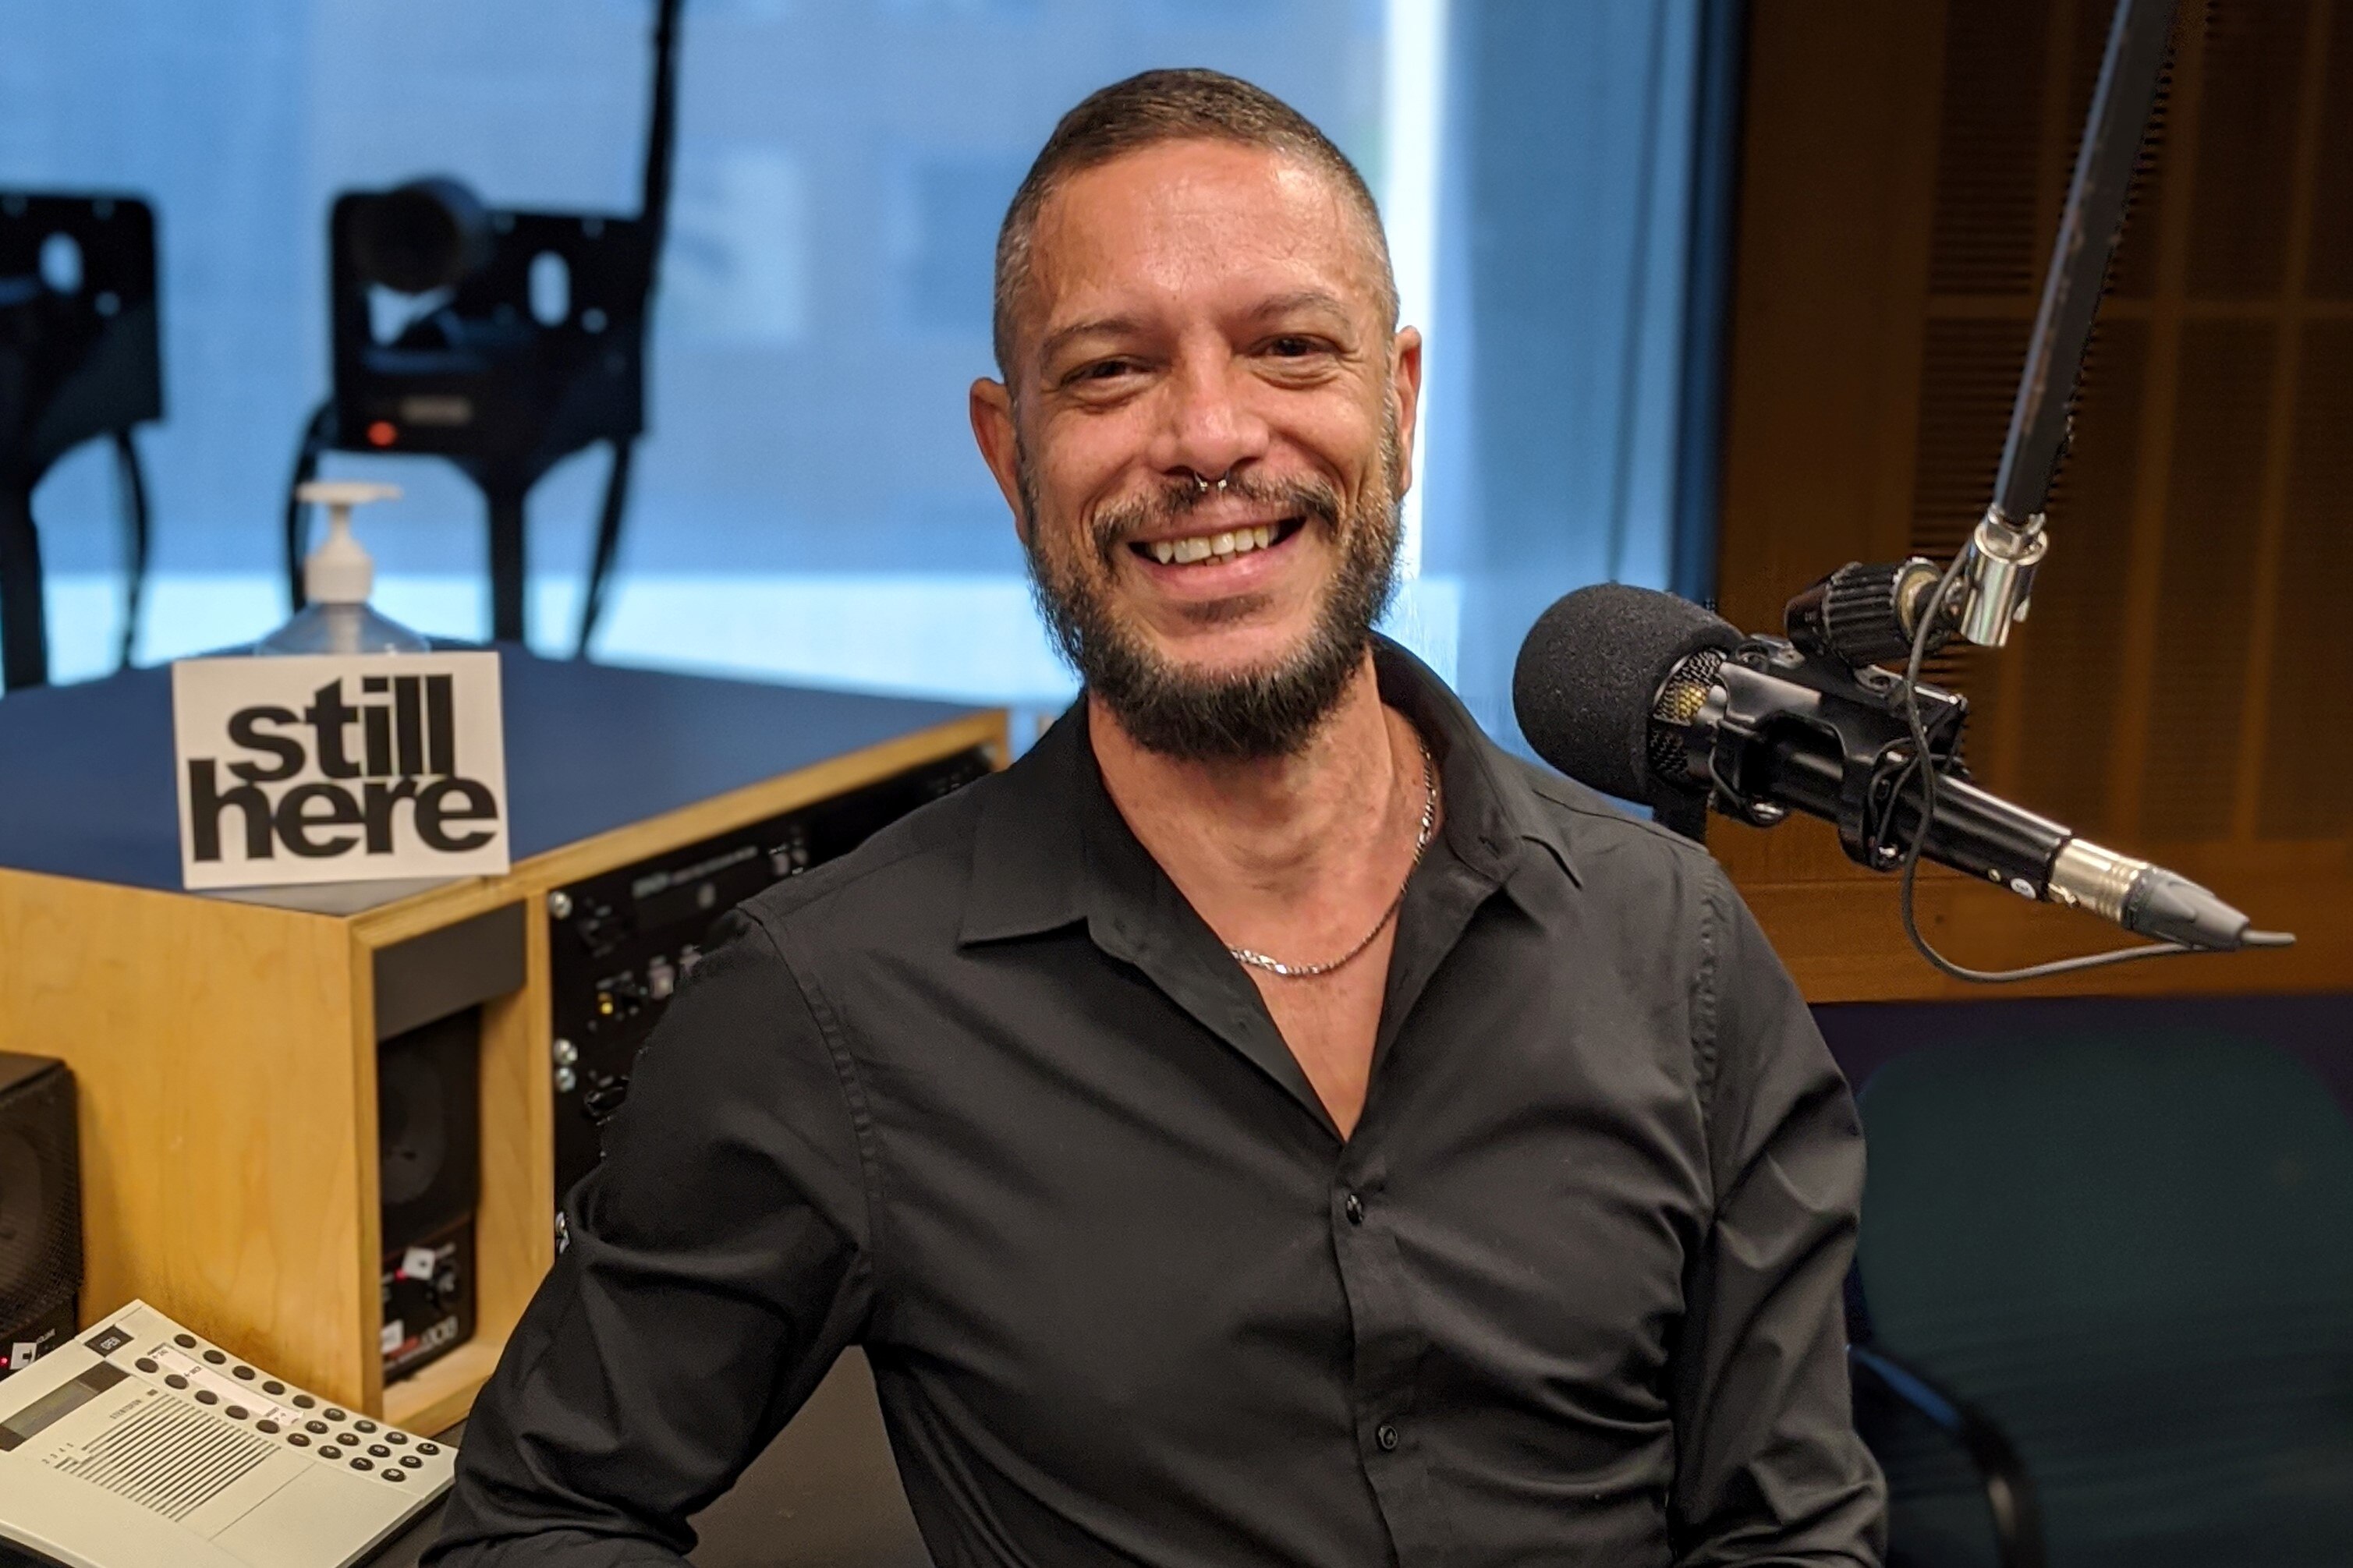 An Aboriginal man in his late 40s in a black shirt sitting in a radio studio and smiling